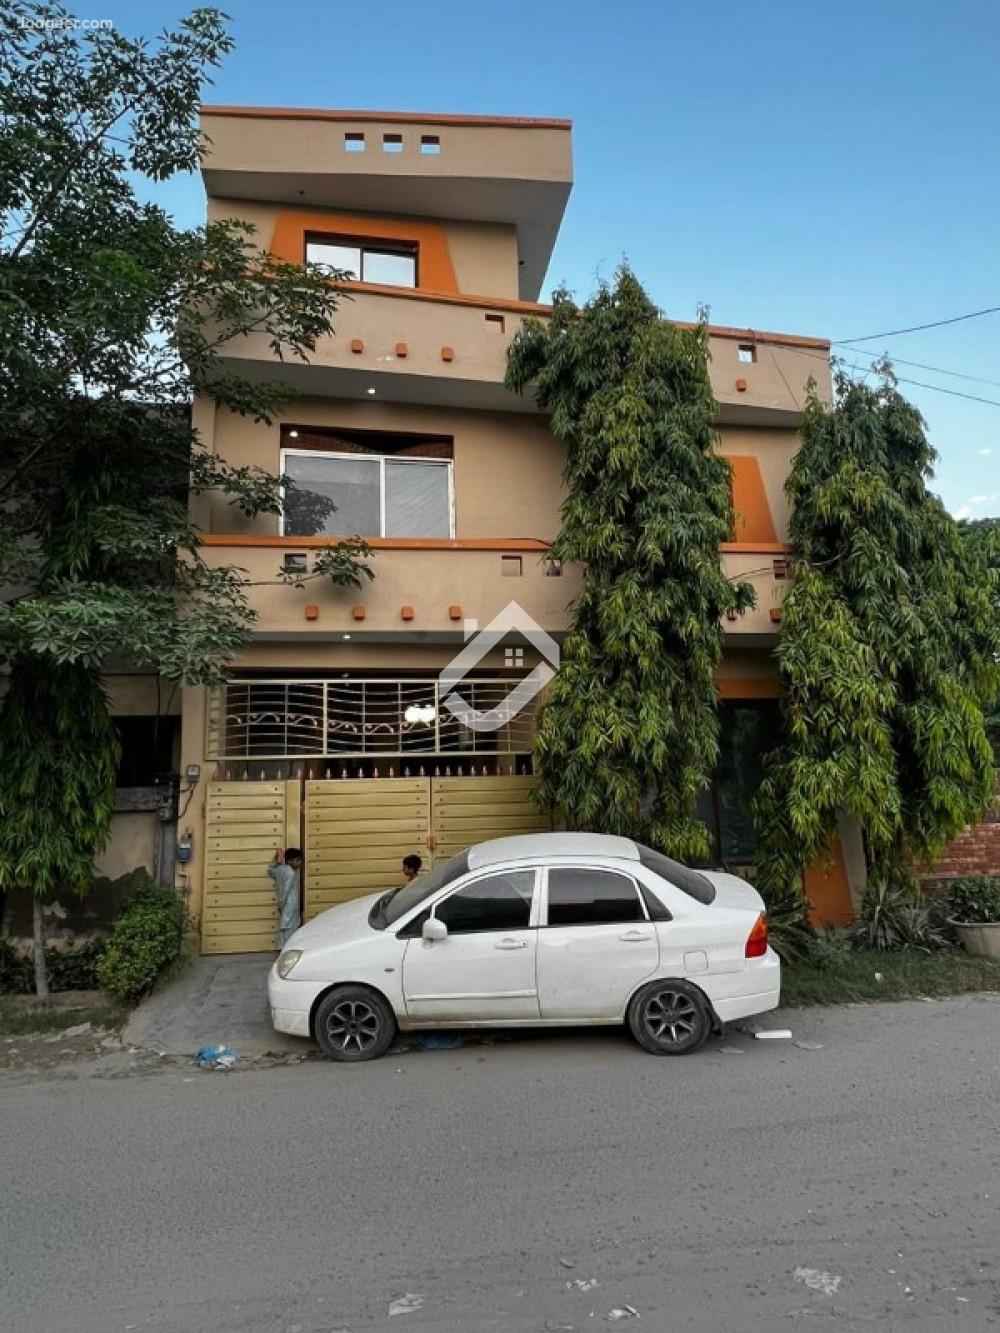 Main image 6 Marla Double Storey House For Sale In Johar Town Block-C Johar Town, Lahore